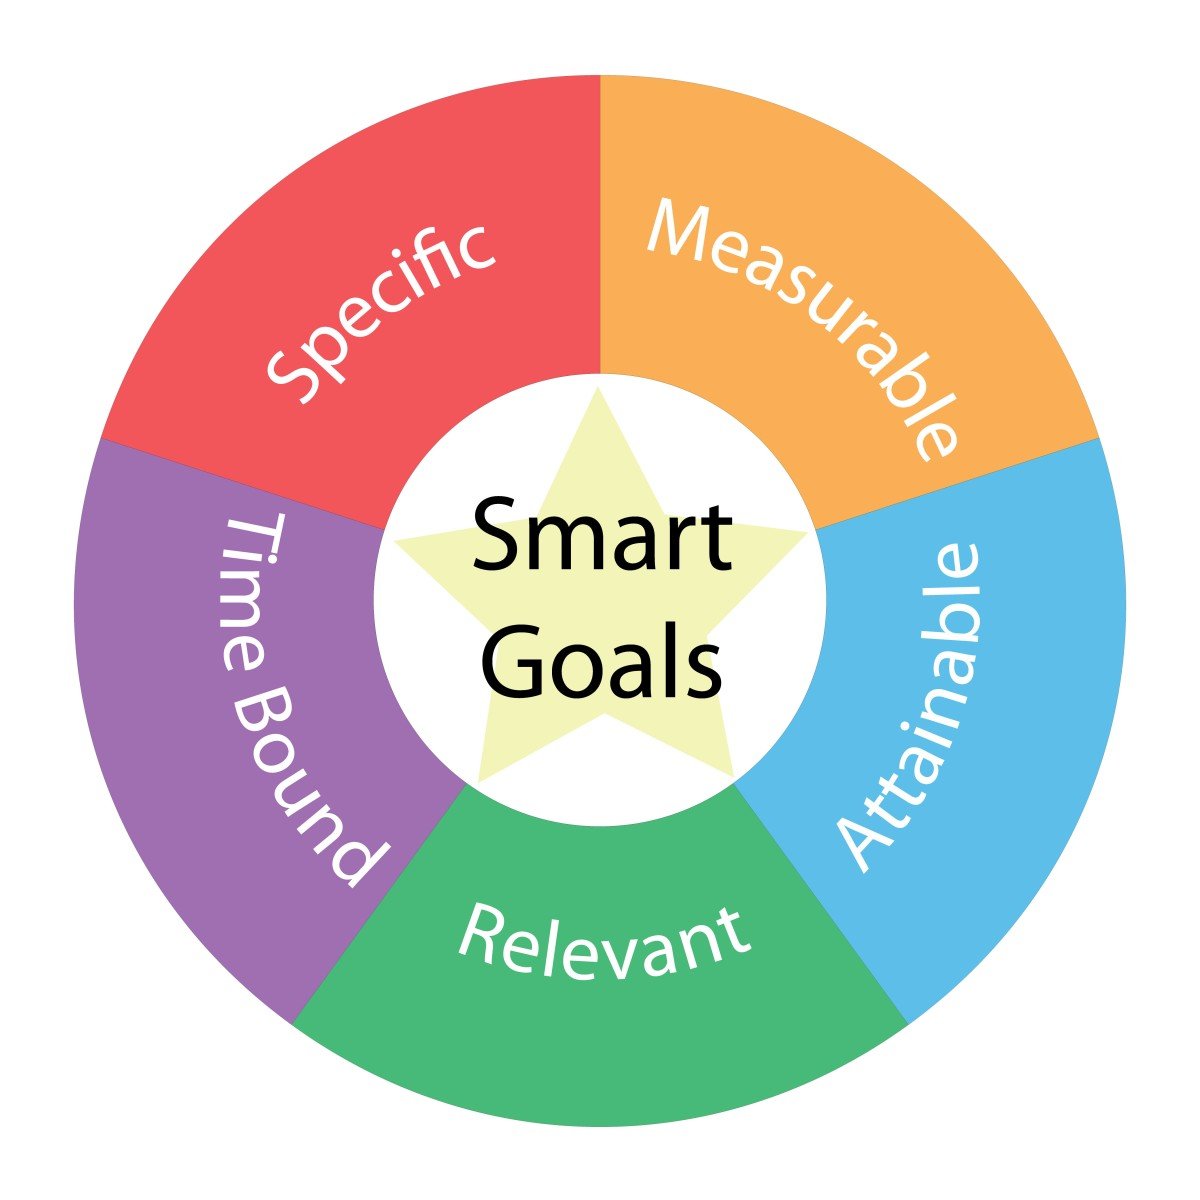 Smart goals circular concept with colors and star